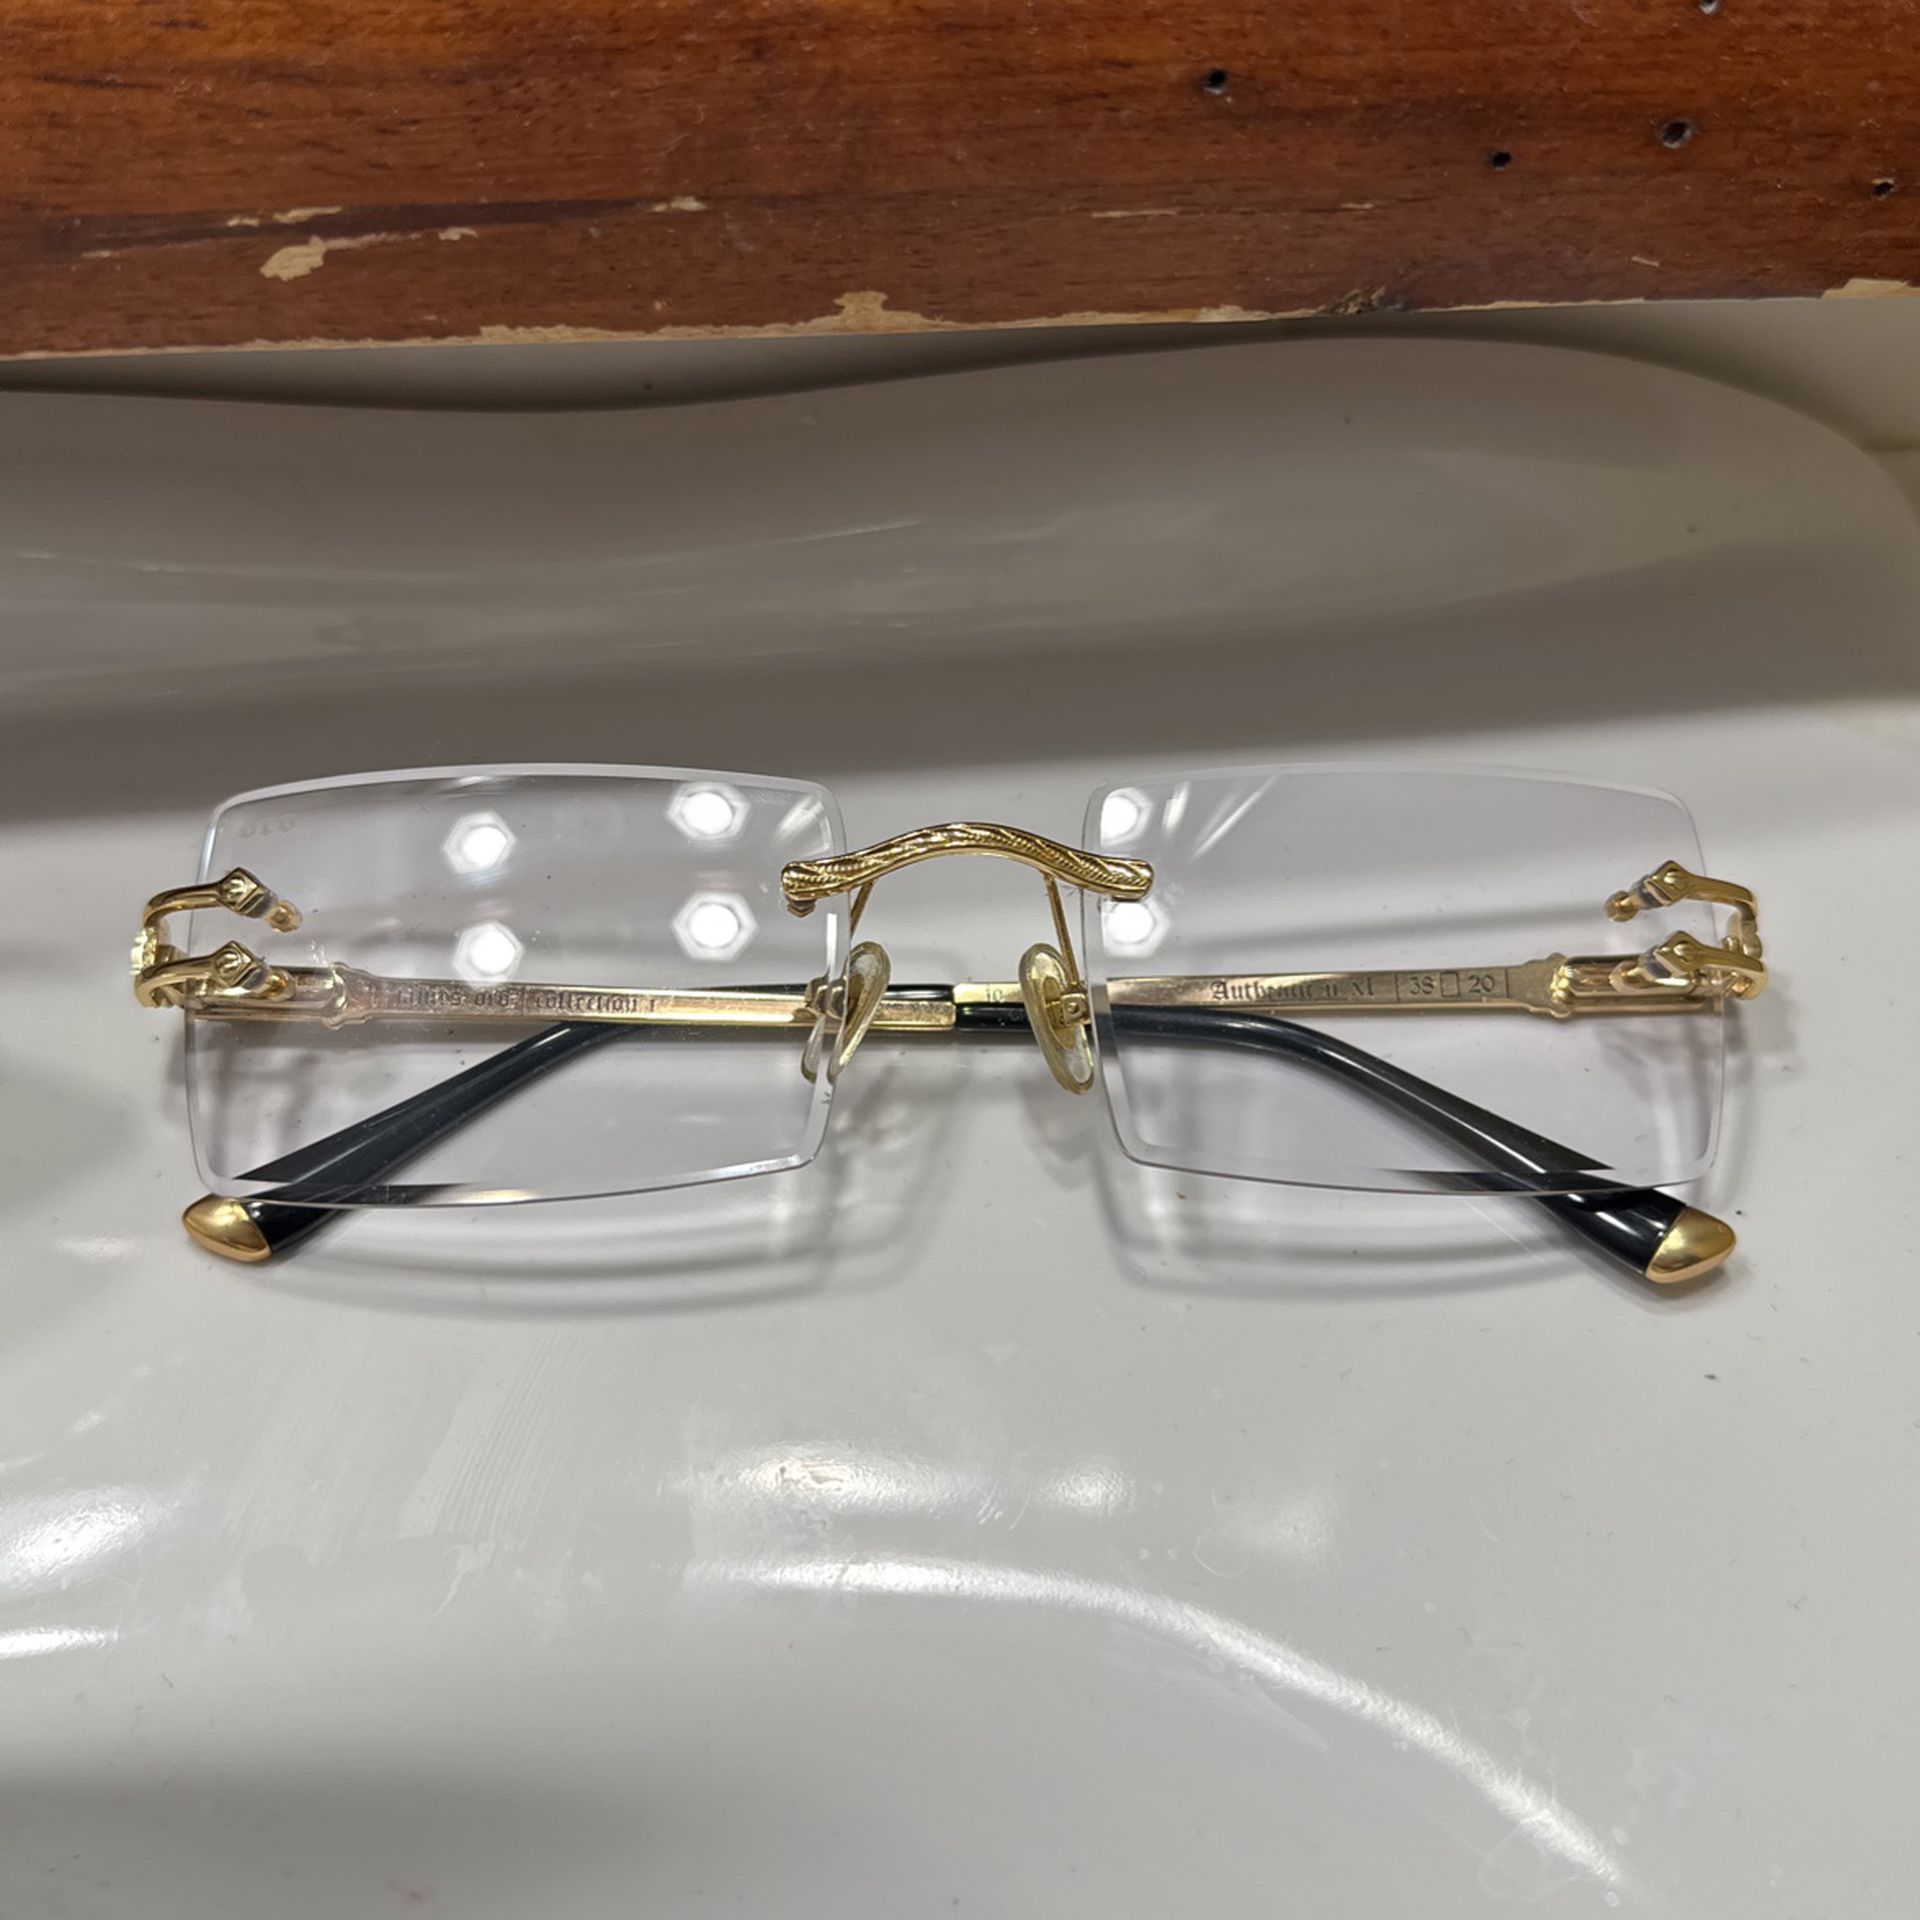 LED Magnifying Eyewear for Sale in Palm Shores, FL - OfferUp